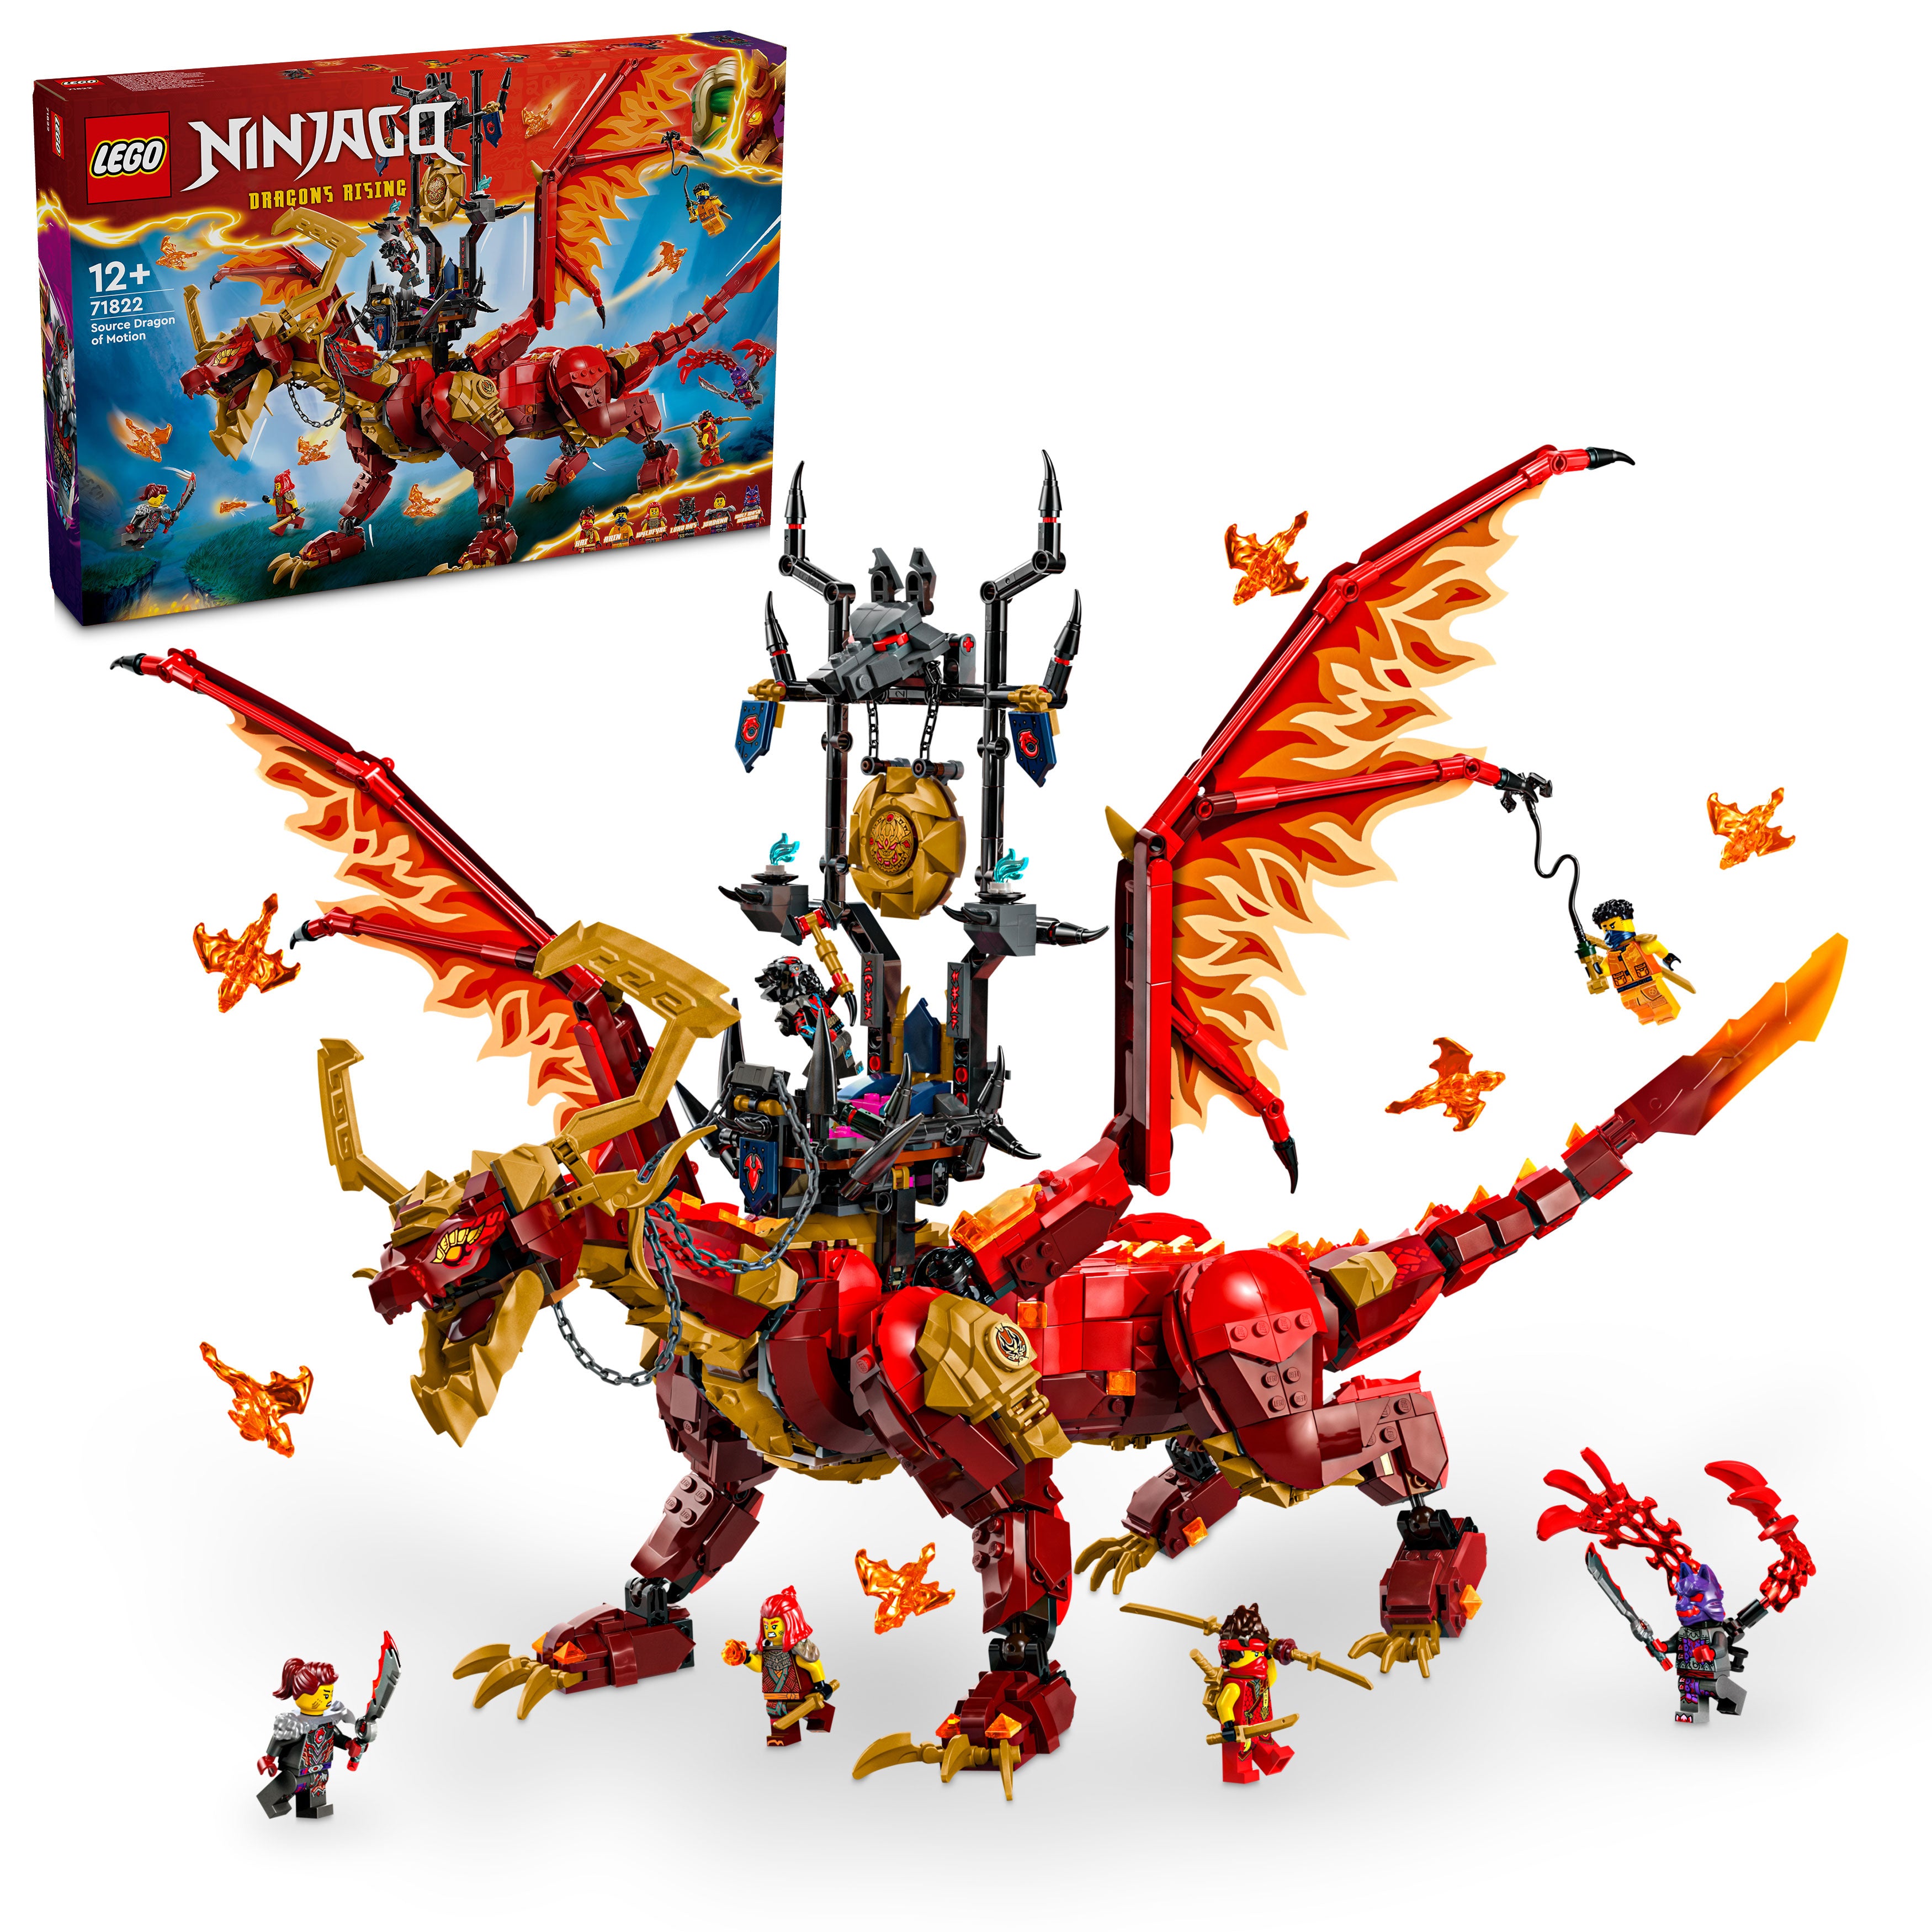 Lego 71822 Source Dragon of Motion